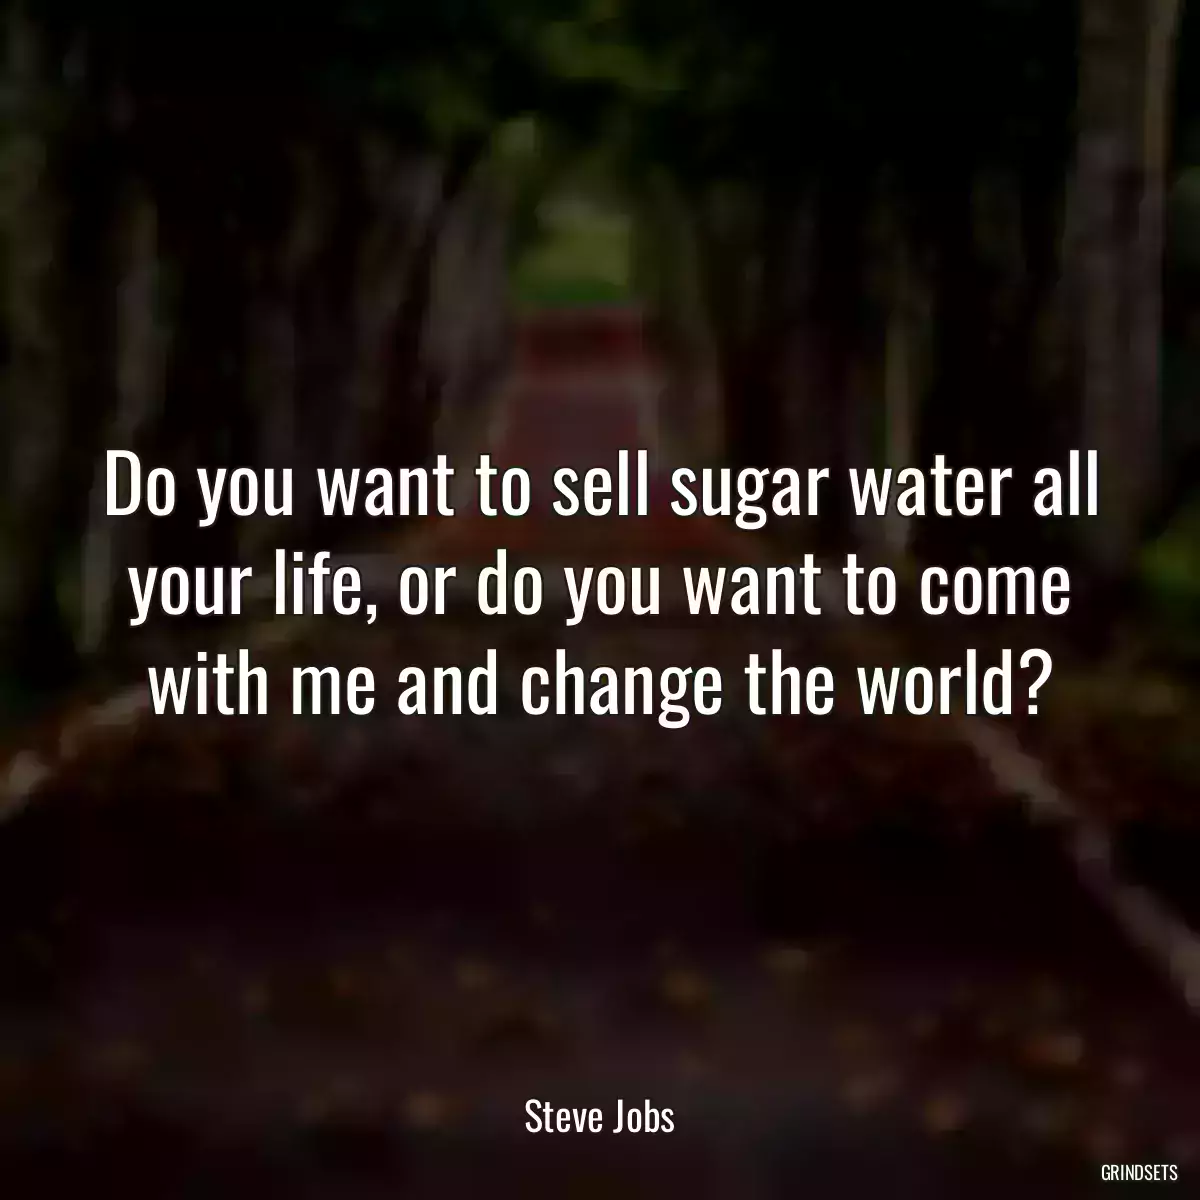 Do you want to sell sugar water all your life, or do you want to come with me and change the world?